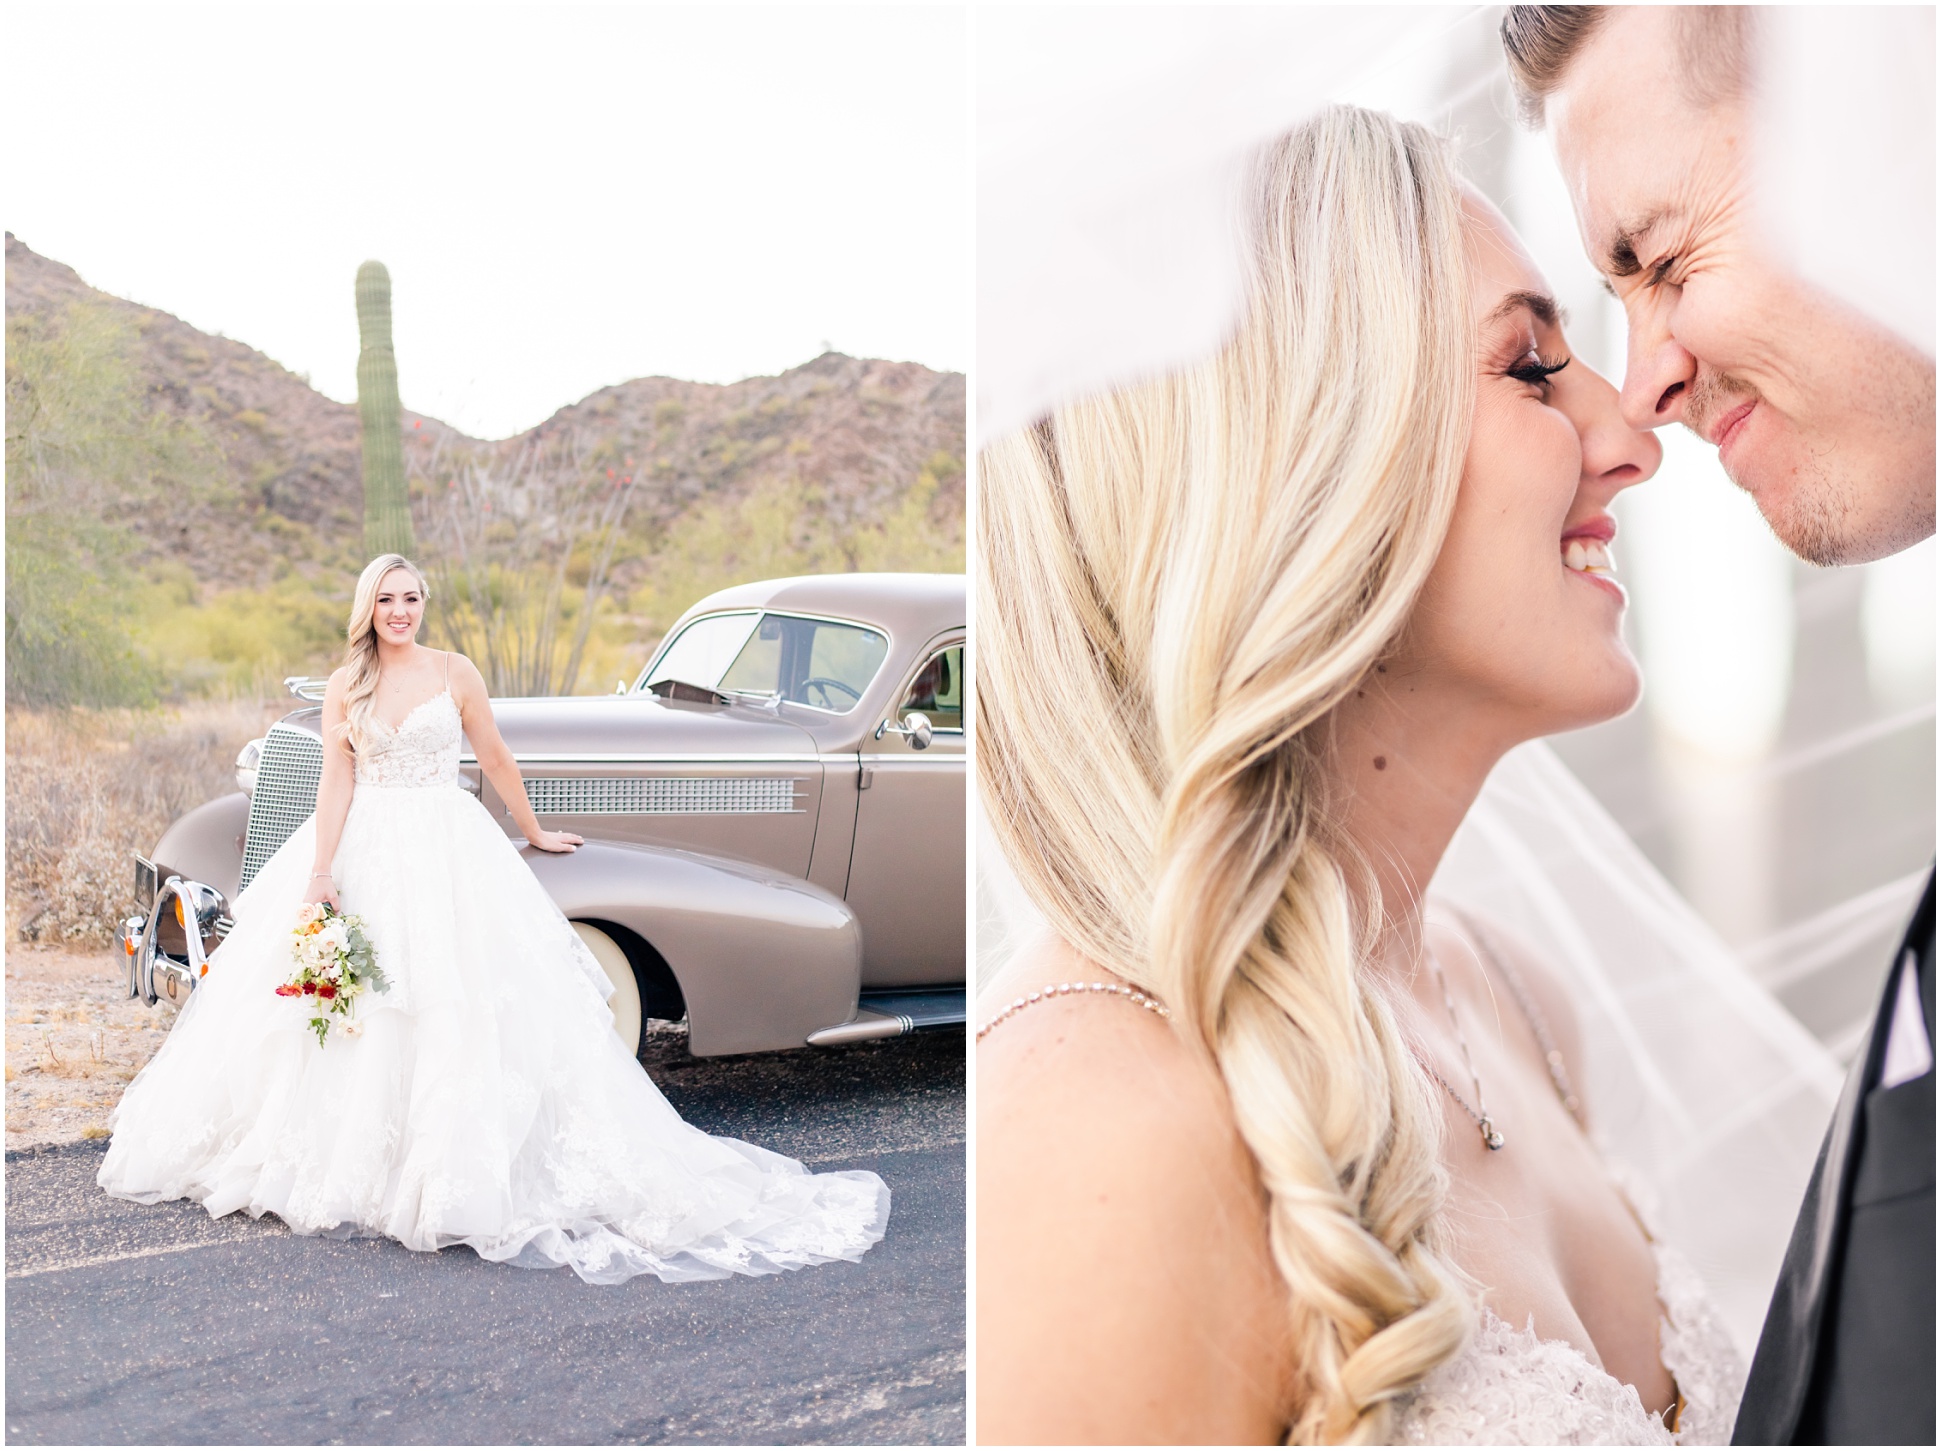 Left photo Brooklyn walking in Enzoani Gown in front of 1937 Cadillac; right photo Brooklyn and Danny eskimo kissing under vail